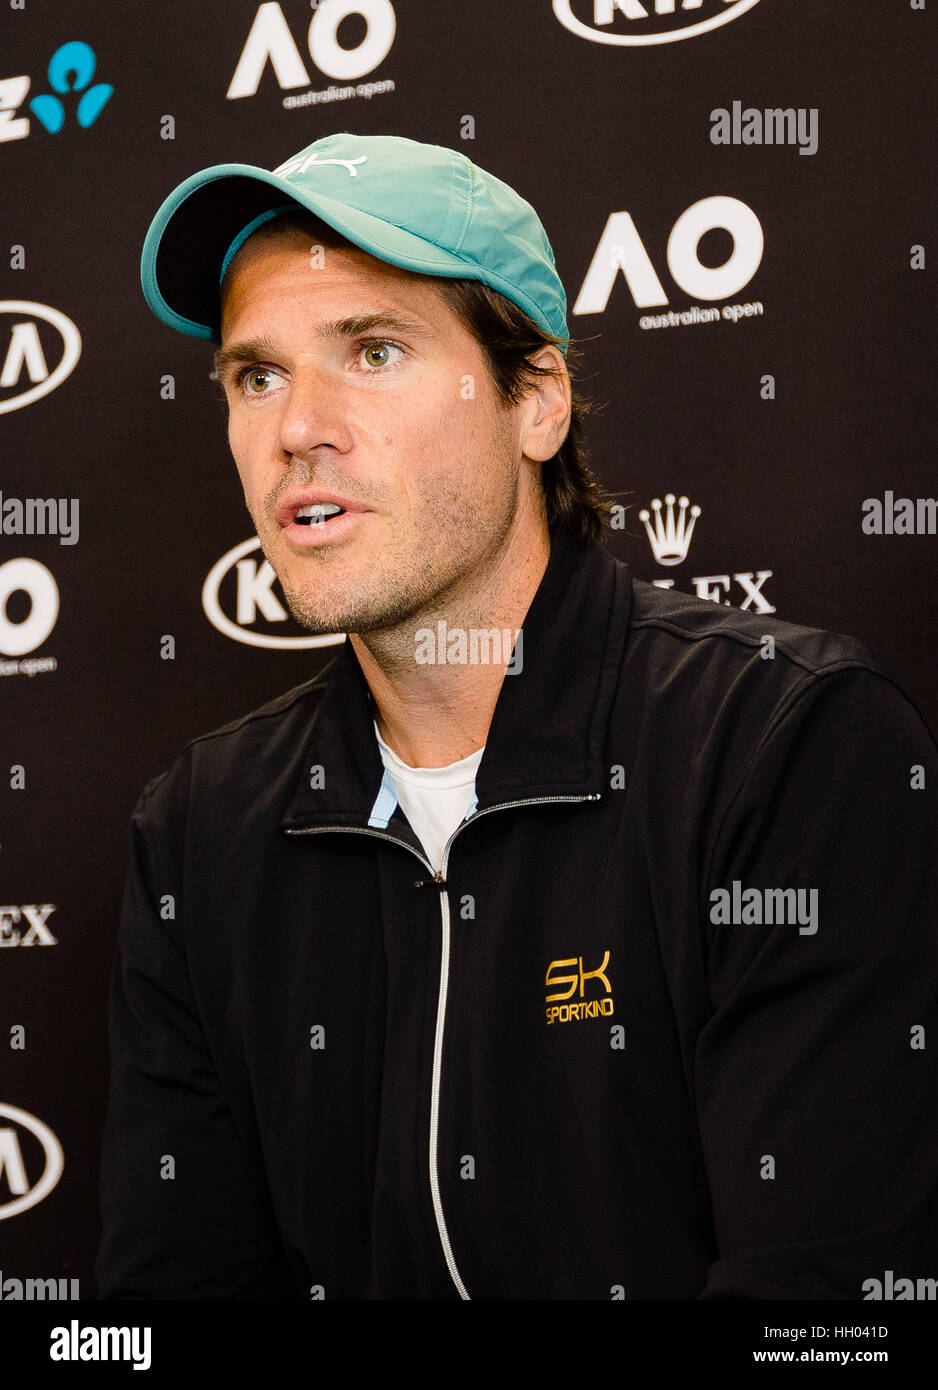 Melbourne, Australia. 15th January 2017. Tommy Haas of Germany speaks during a press conference before the start of the 2017 Australian Open at Melbourne Park in Melbourne, Australia. Credit: Frank Molter/Alamy Live News Stock Photo